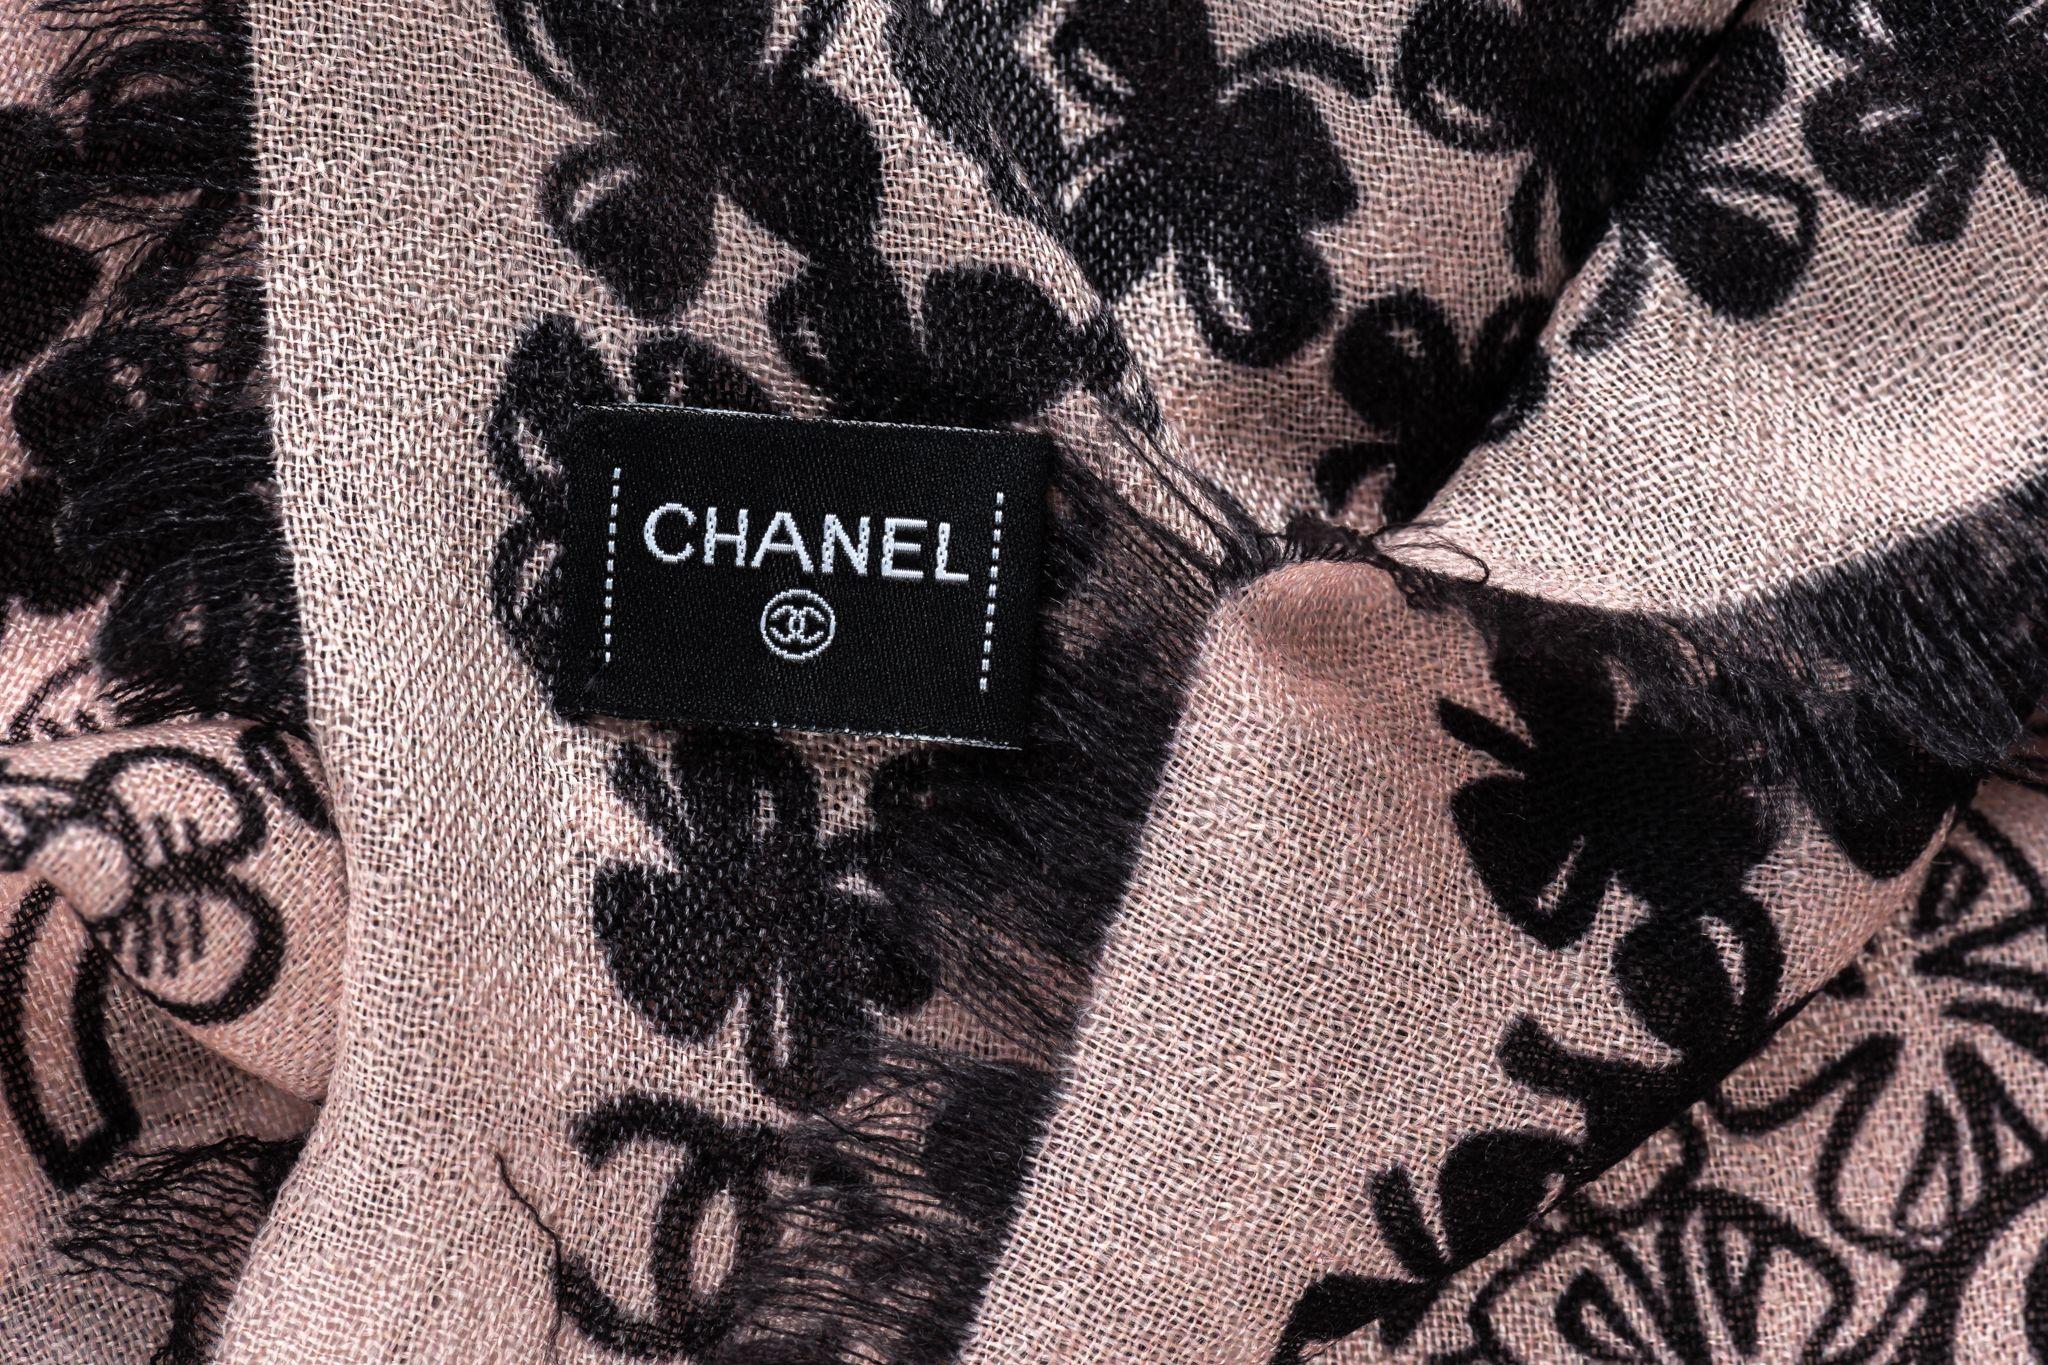 Chanel new black pink cashmere shawl. Clover and multi logo design. Care tag attached.